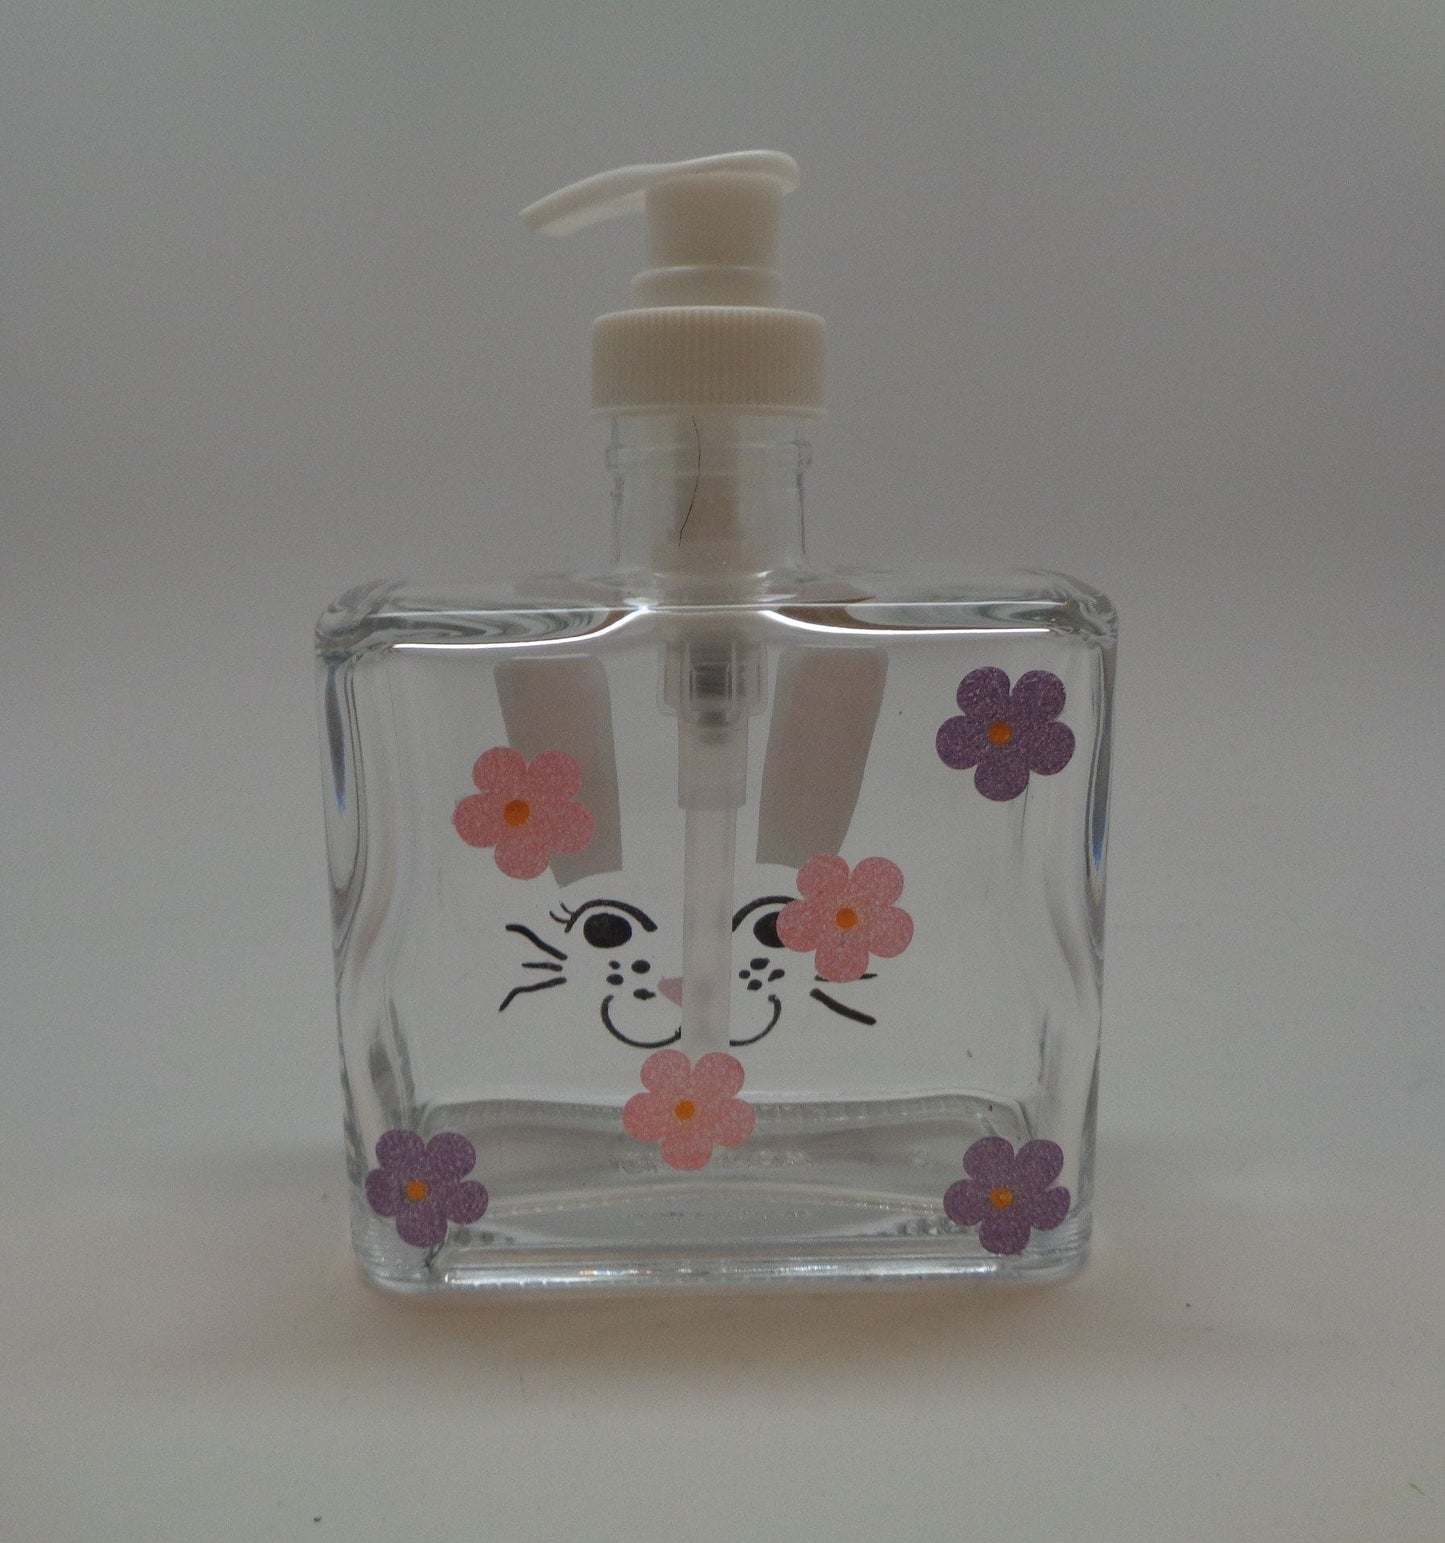 Hand Painted Easter Bunny Soap Dispenser with cute bunny face